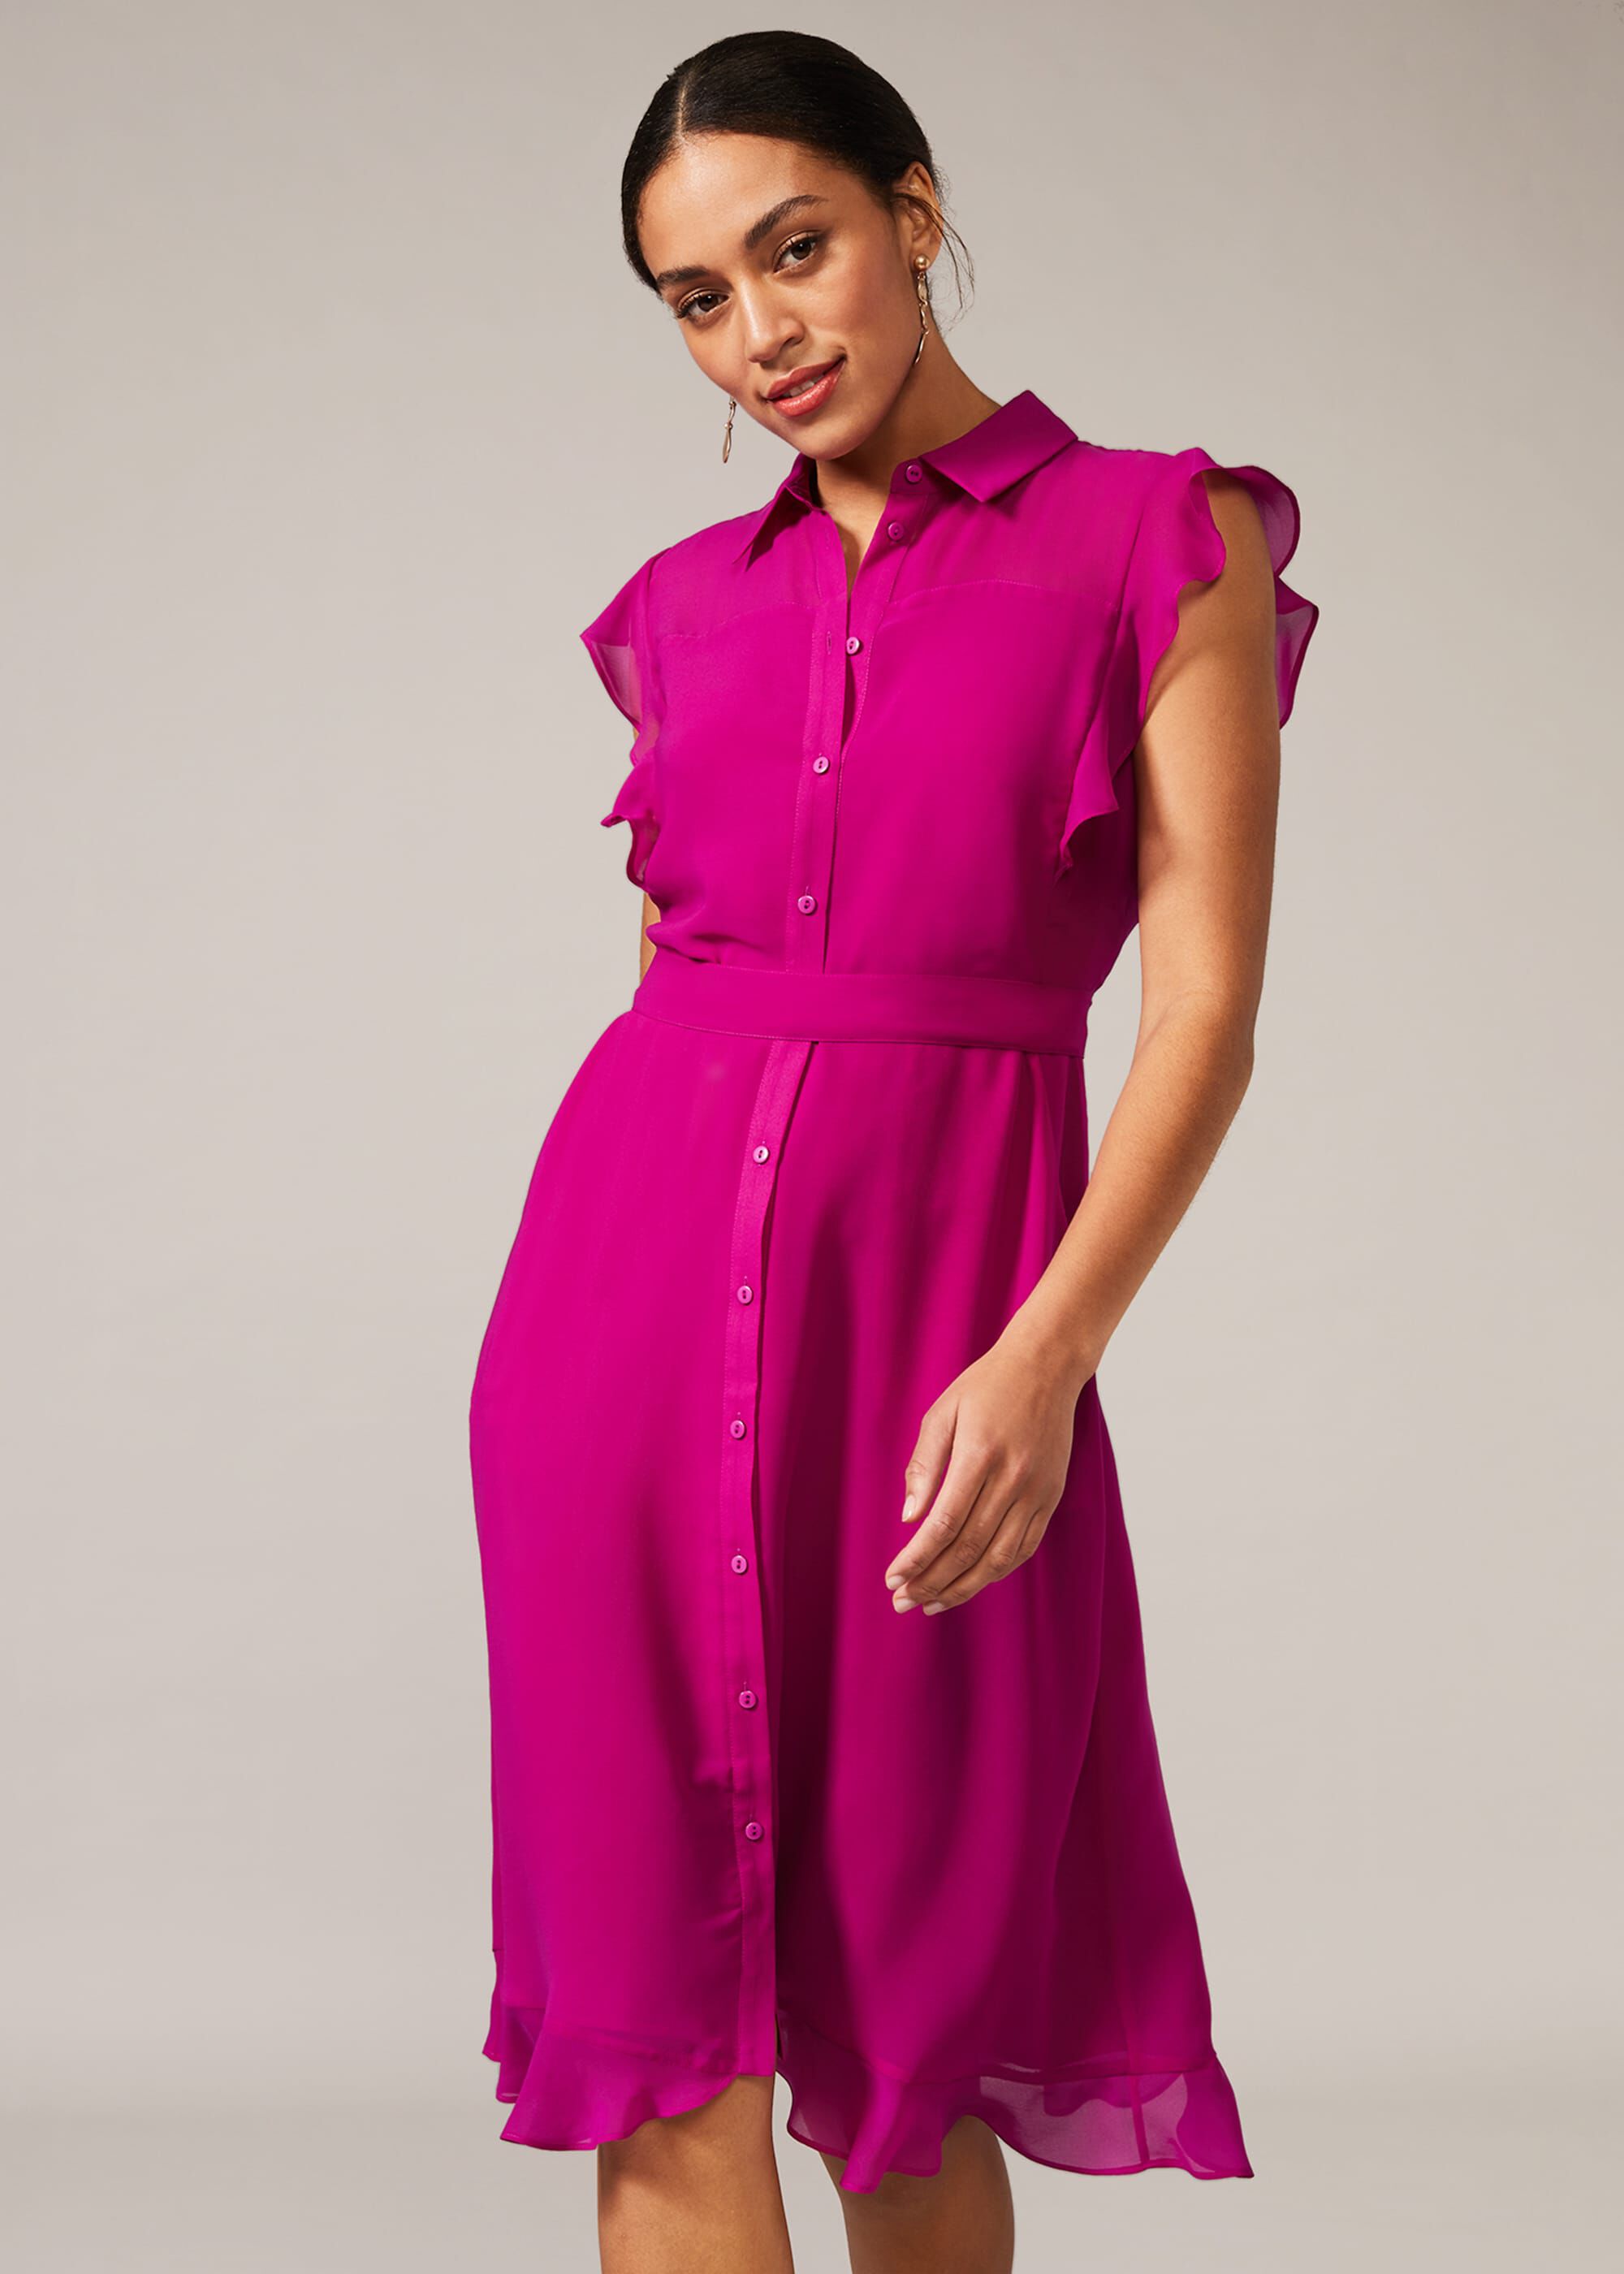 phase eight occasion dresses sale